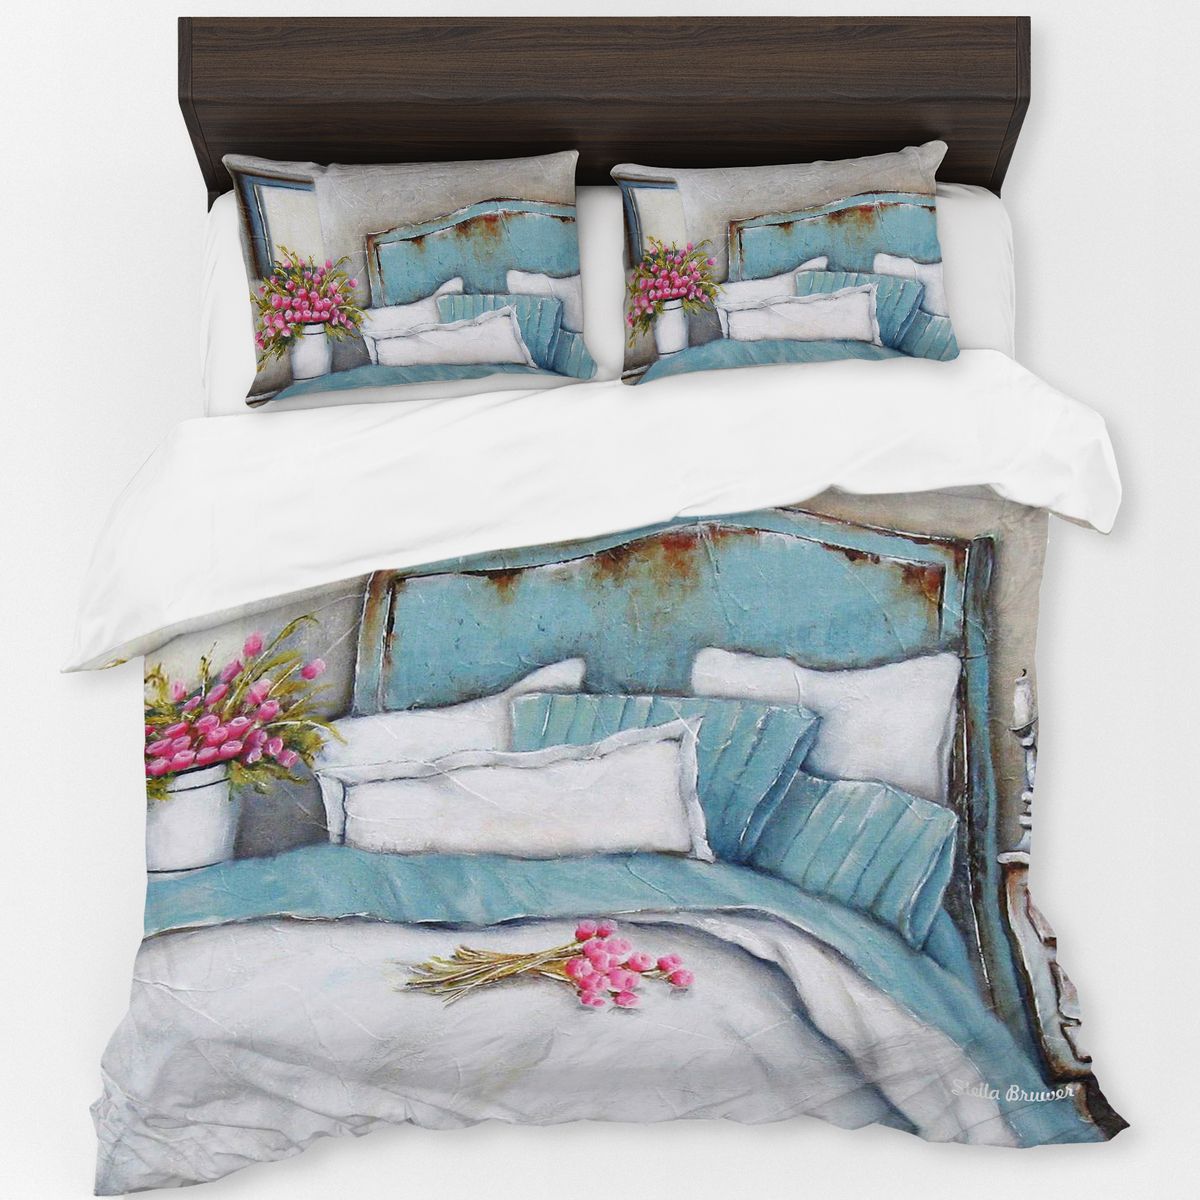 Flowers For You By Stella Bruwer Duvet Cover Set